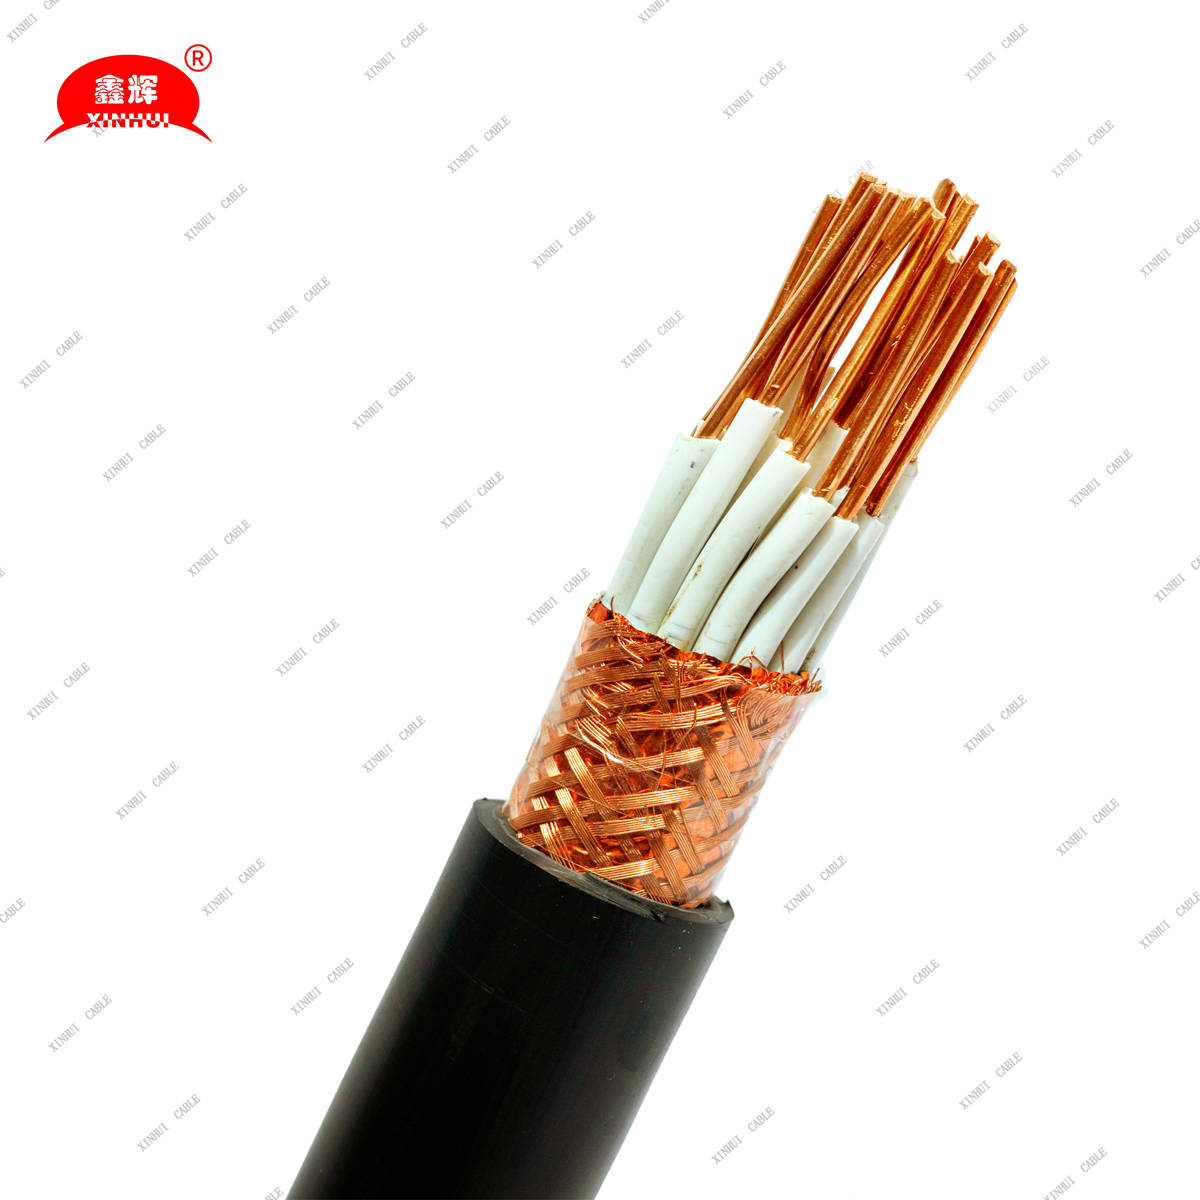 KVV Copper Core PVC Insulated PVC Sheathed KVV Cable 450/750 4-37 0.75-10 Laid Indoors in Fixed Locations Such As Cable Trenches And Pipelines